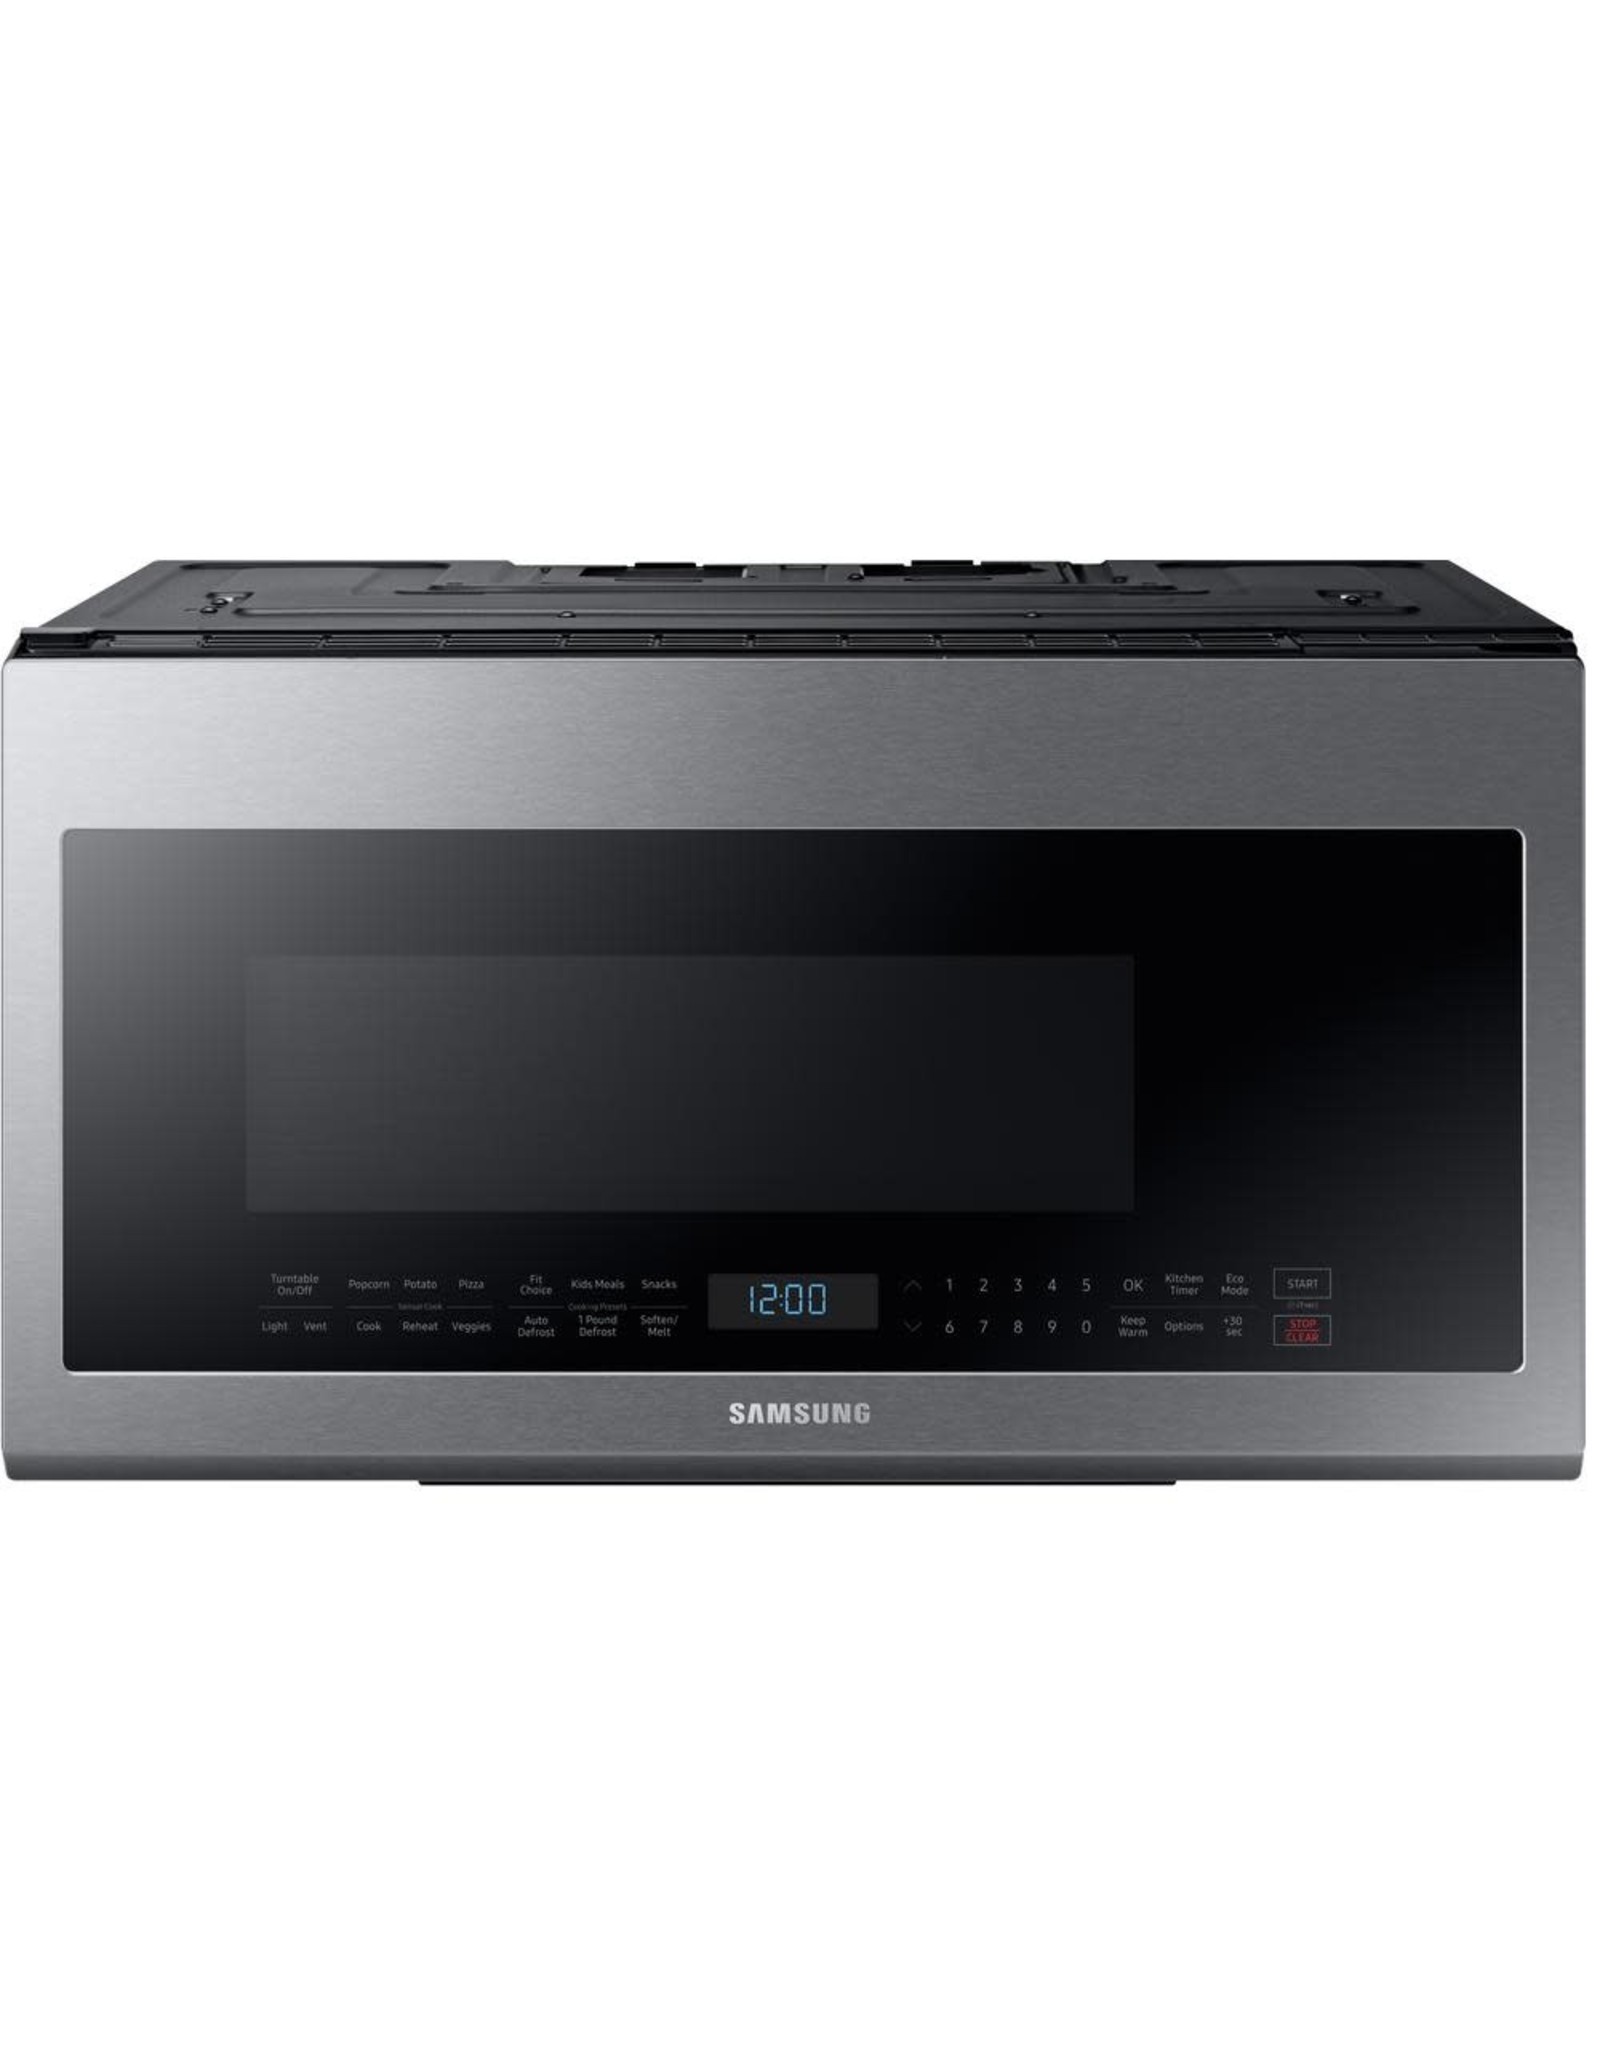 SAMSUNG ME21M706BAS Samsung 30 in. W 2.1 cu. ft. Over the Range Microwave in Fingerprint Resistant Stainless Steel with Sensor Cooking